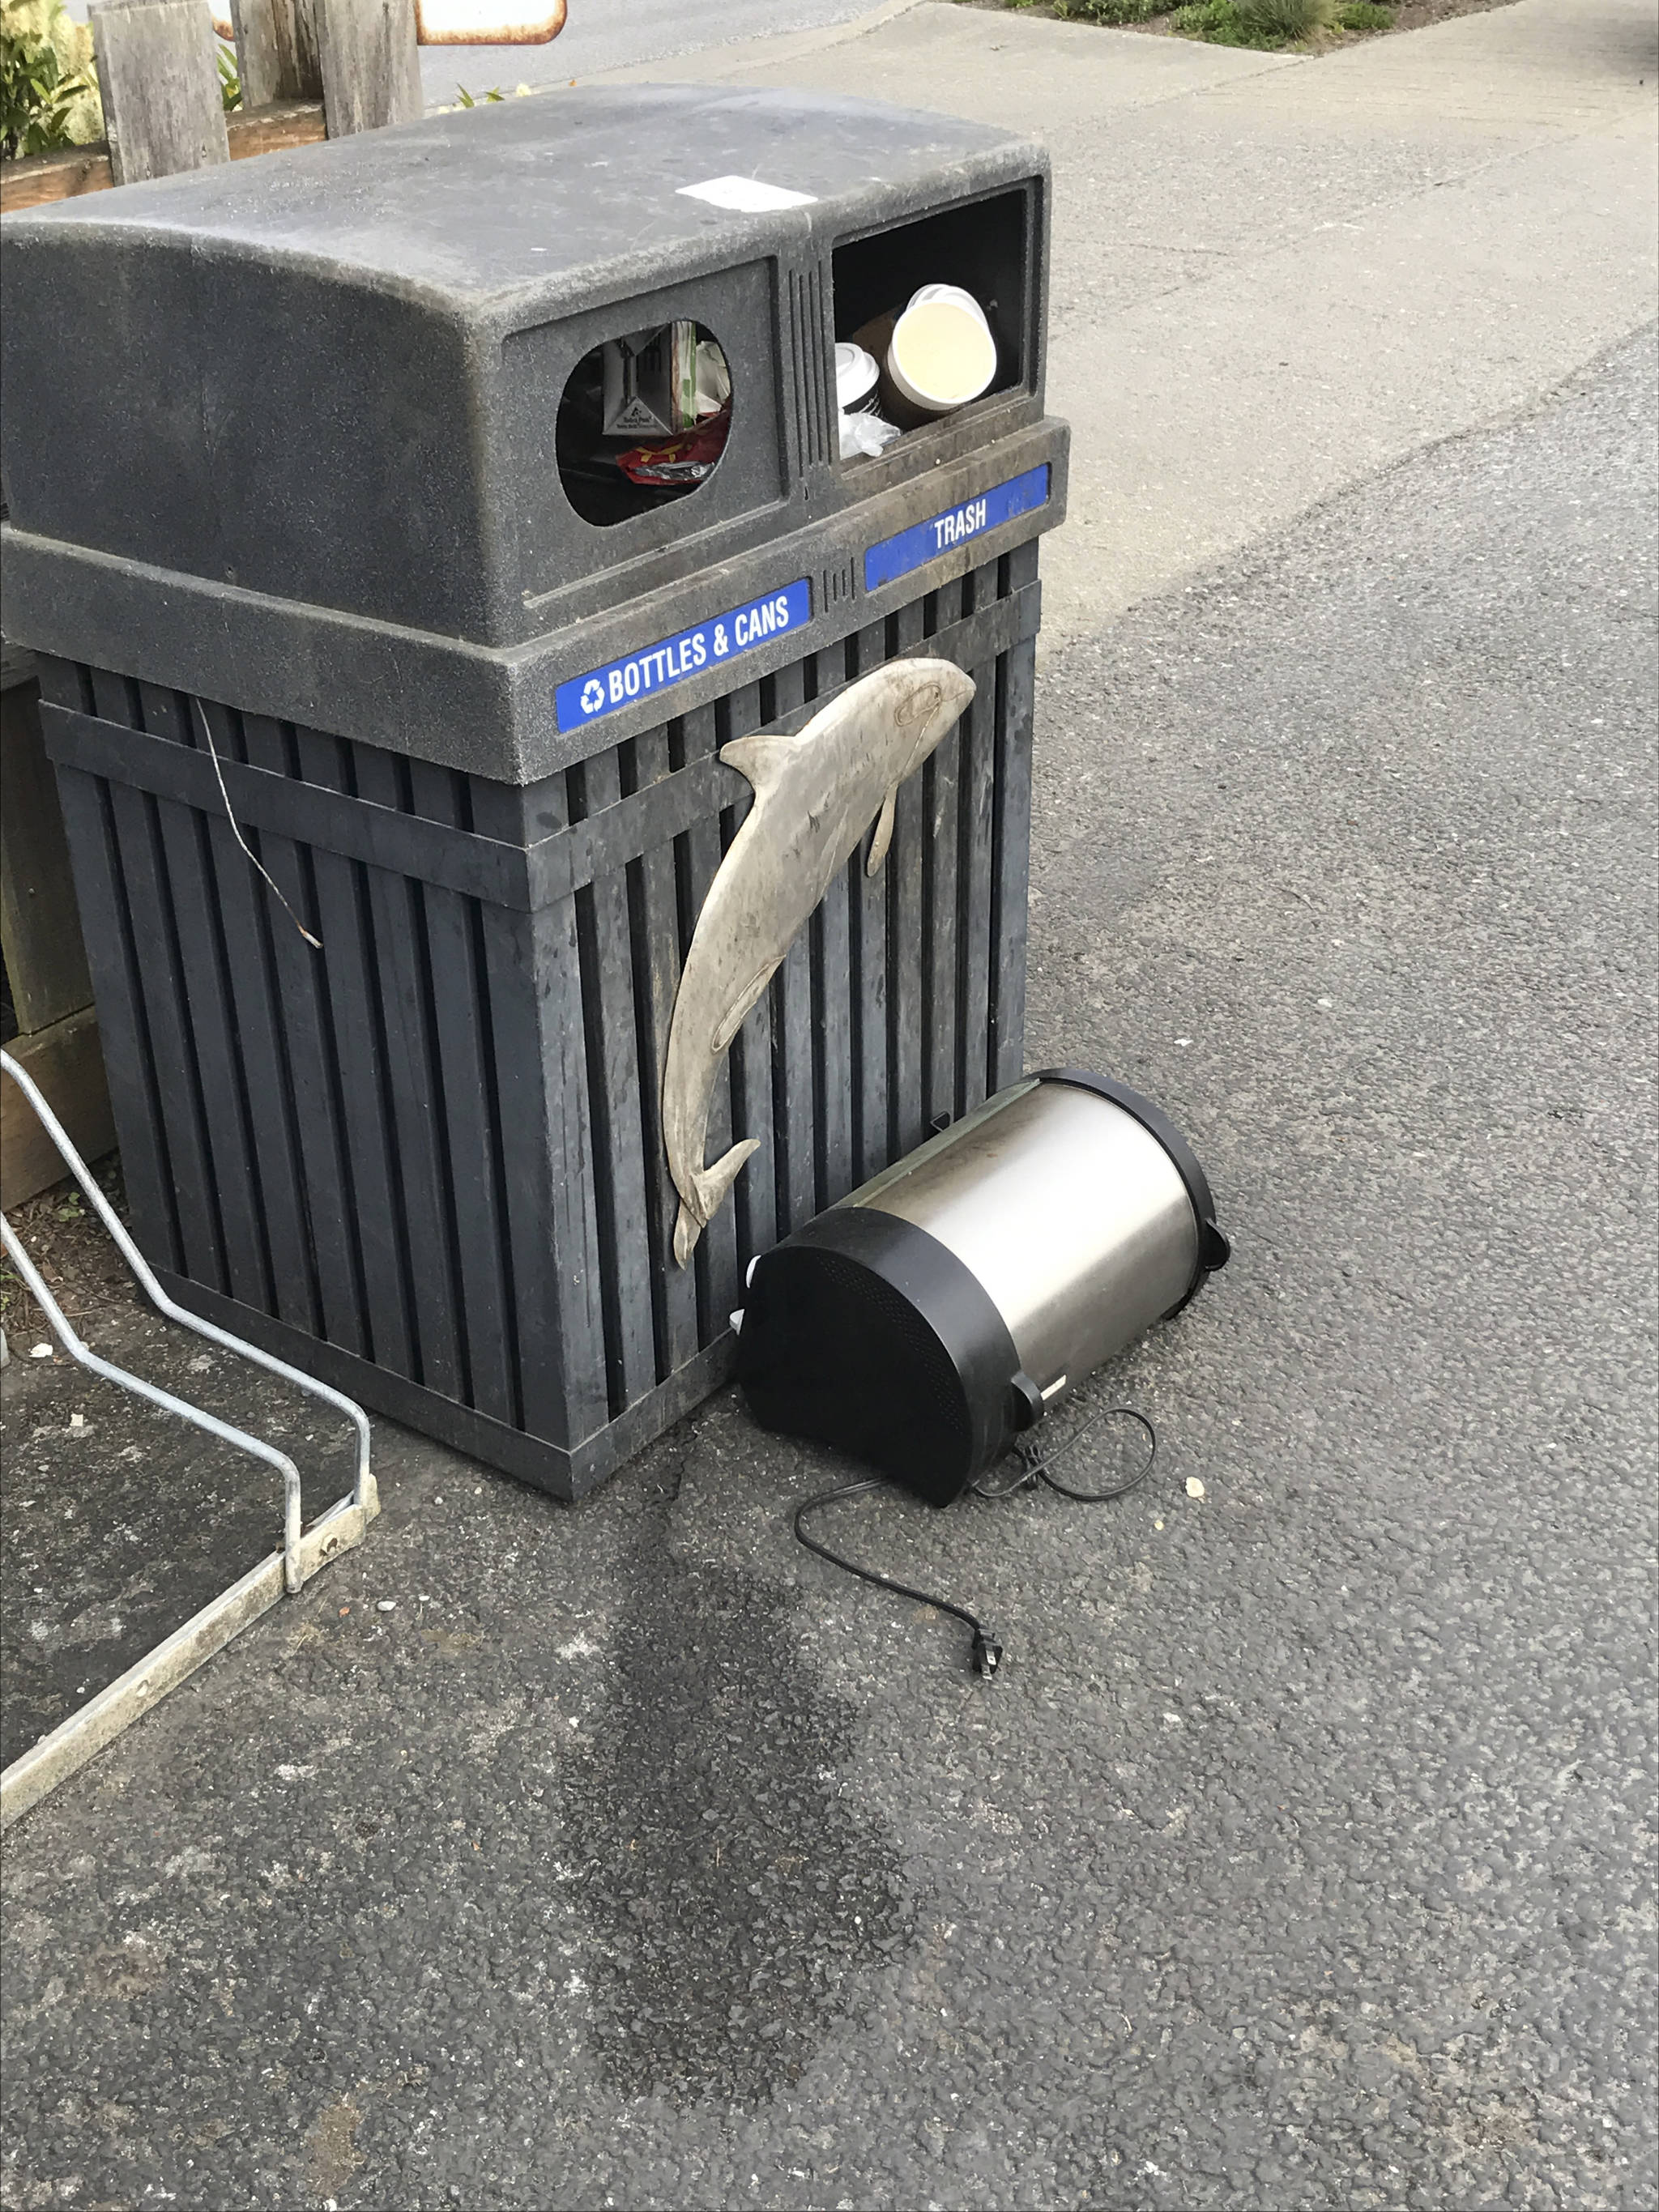 Trash cans in town are not for household garbage